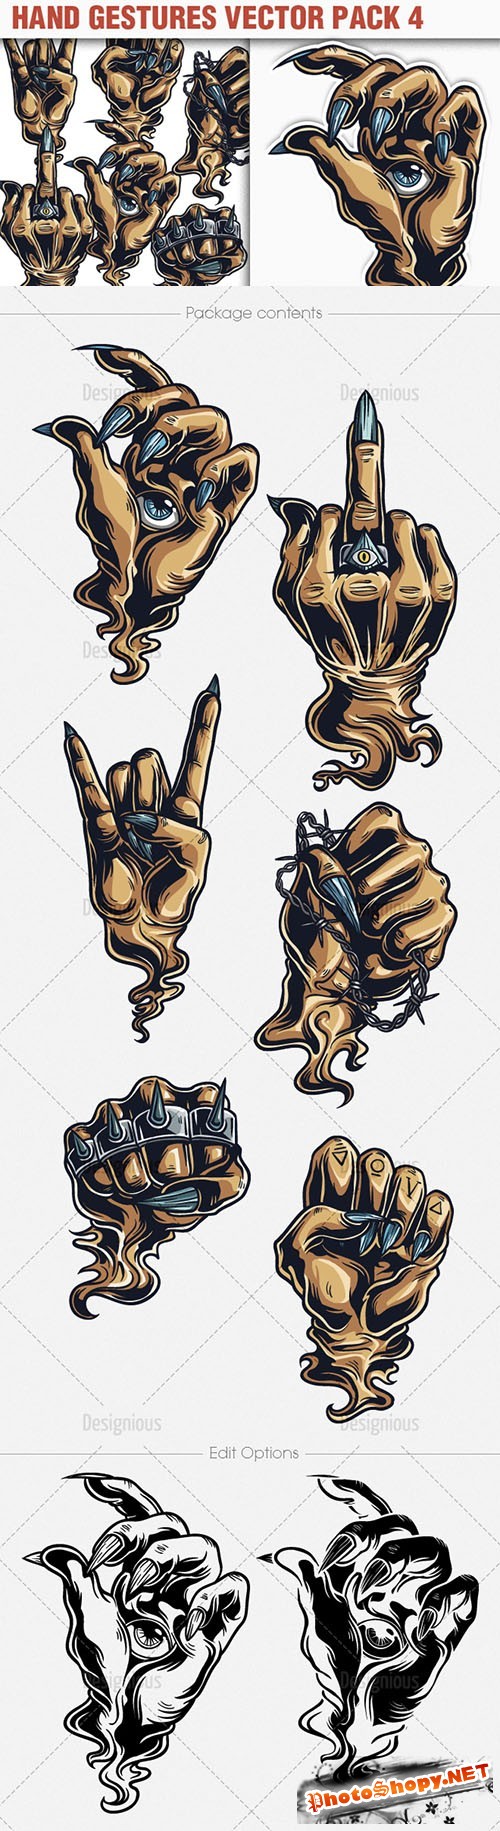 Hand Gestures Vector Illustrations Pack 4